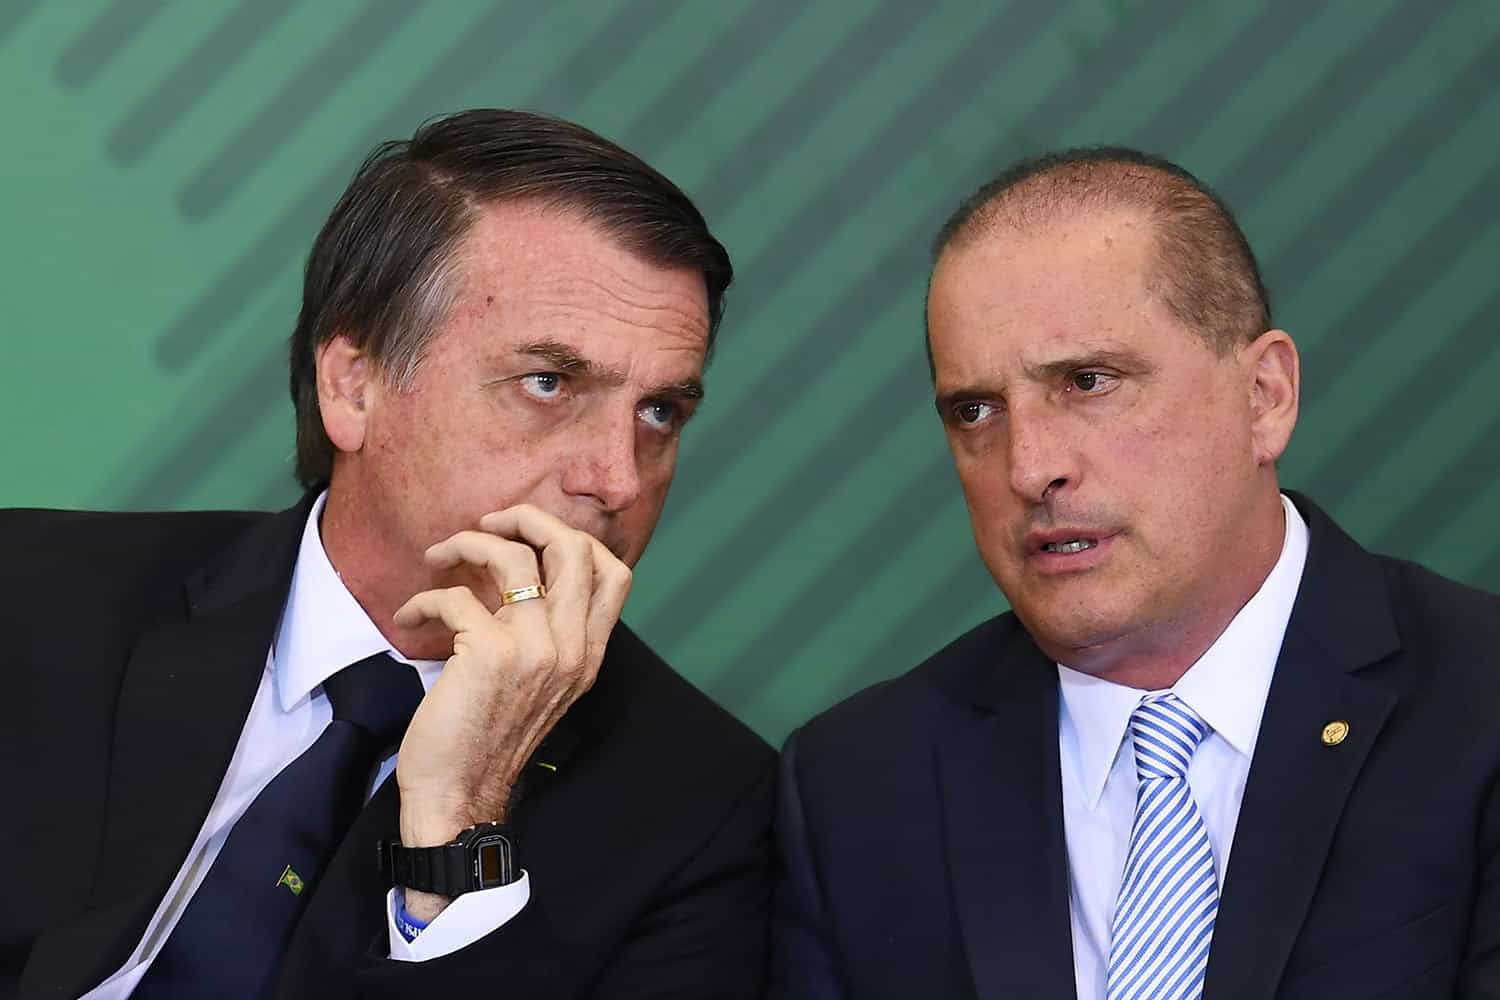 Brazilian President Jair Bolsonaro (L) talks to Chief of Staff Onyx Lorenzoni during the appointment ceremony of the new heads of public banks, at Planalto Palace in Brasilia on January 7, 2019. - Brazil's Finance Minister Paulo Guedes appointed the new presidents of the country's public banks. (Photo by EVARISTO SA / AFP)